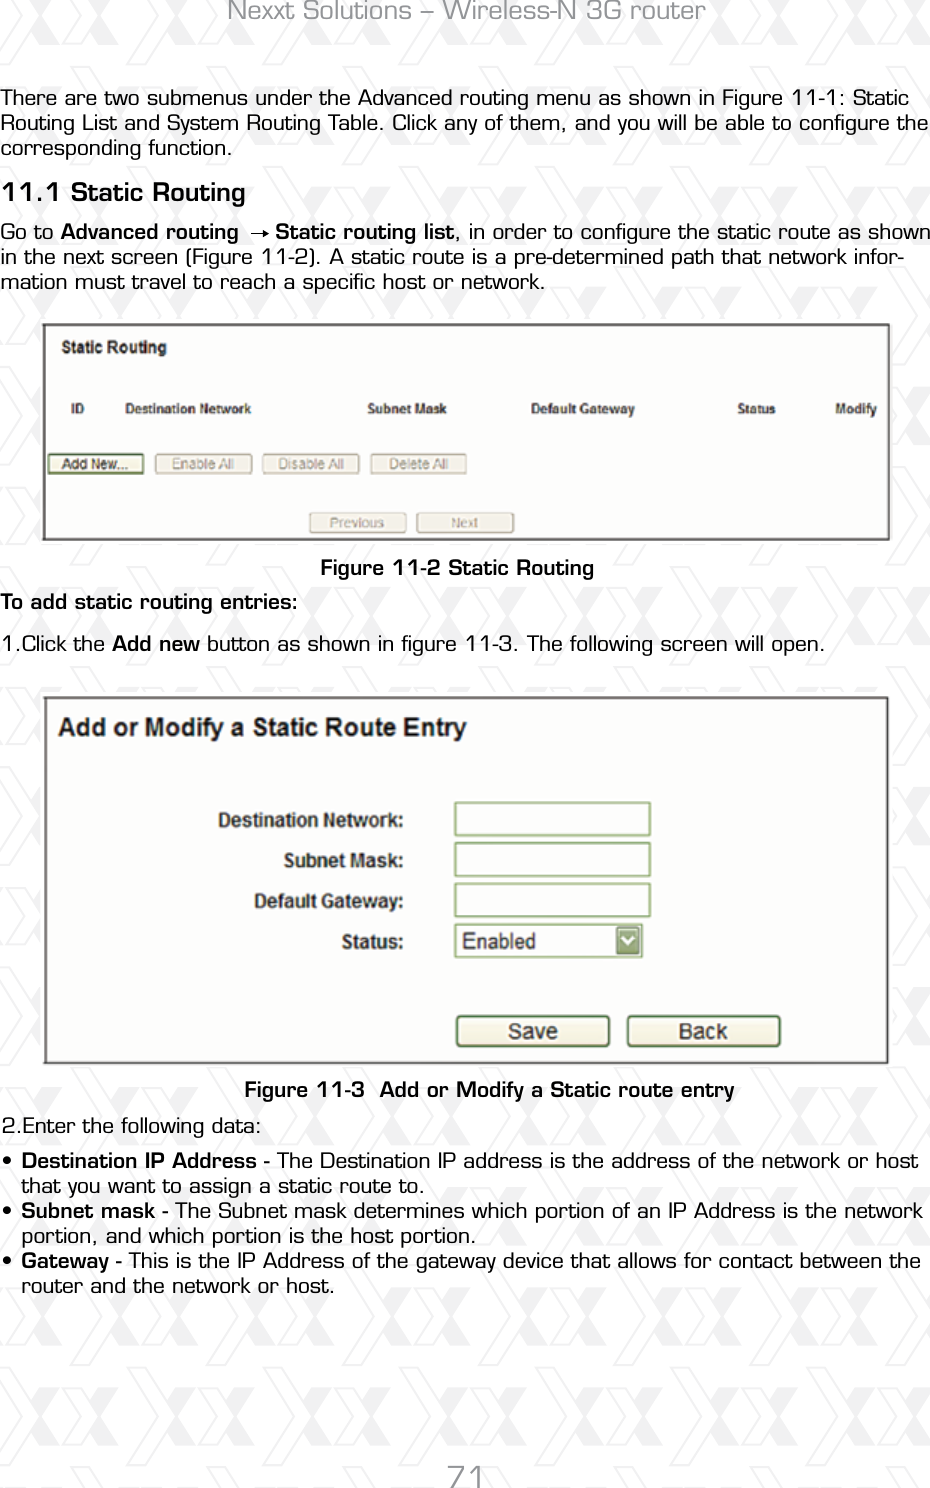 Nexxt Solutions – Wireless-N 3G router71Figure 11-2 Static RoutingFigure 11-3  Add or Modify a Static route entryTo add static routing entries:11.1 Static RoutingClick the Add new button as shown in ﬁgure 11-3. The following screen will open.Enter the following data:There are two submenus under the Advanced routing menu as shown in Figure 11-1: Static Routing List and System Routing Table. Click any of them, and you will be able to conﬁgure the corresponding function.Go to Advanced routing     Static routing list, in order to conﬁgure the static route as shown in the next screen (Figure 11-2). A static route is a pre-determined path that network infor-mation must travel to reach a speciﬁc host or network.1.2.Destination IP Address - The Destination IP address is the address of the network or host that you want to assign a static route to.Subnet mask - The Subnet mask determines which portion of an IP Address is the network portion, and which portion is the host portion.Gateway - This is the IP Address of the gateway device that allows for contact between the router and the network or host.•••